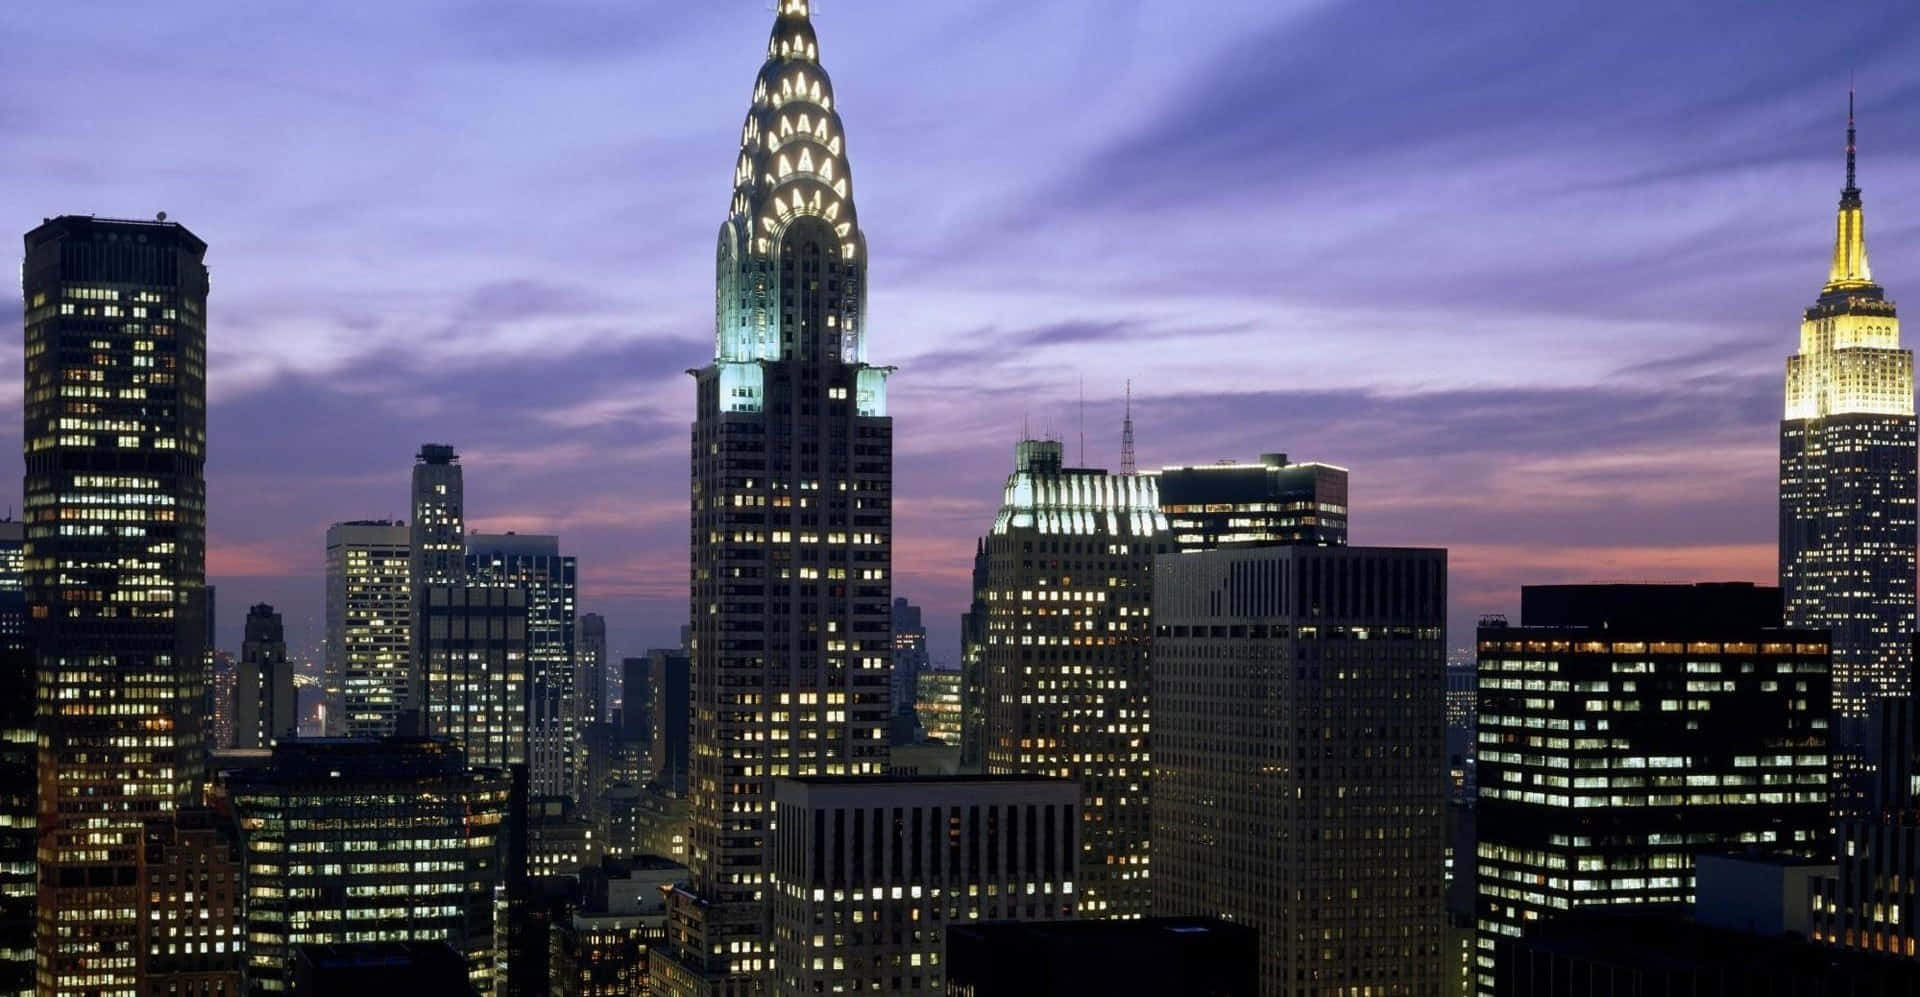 A View Of The Chrysler Building At Dusk